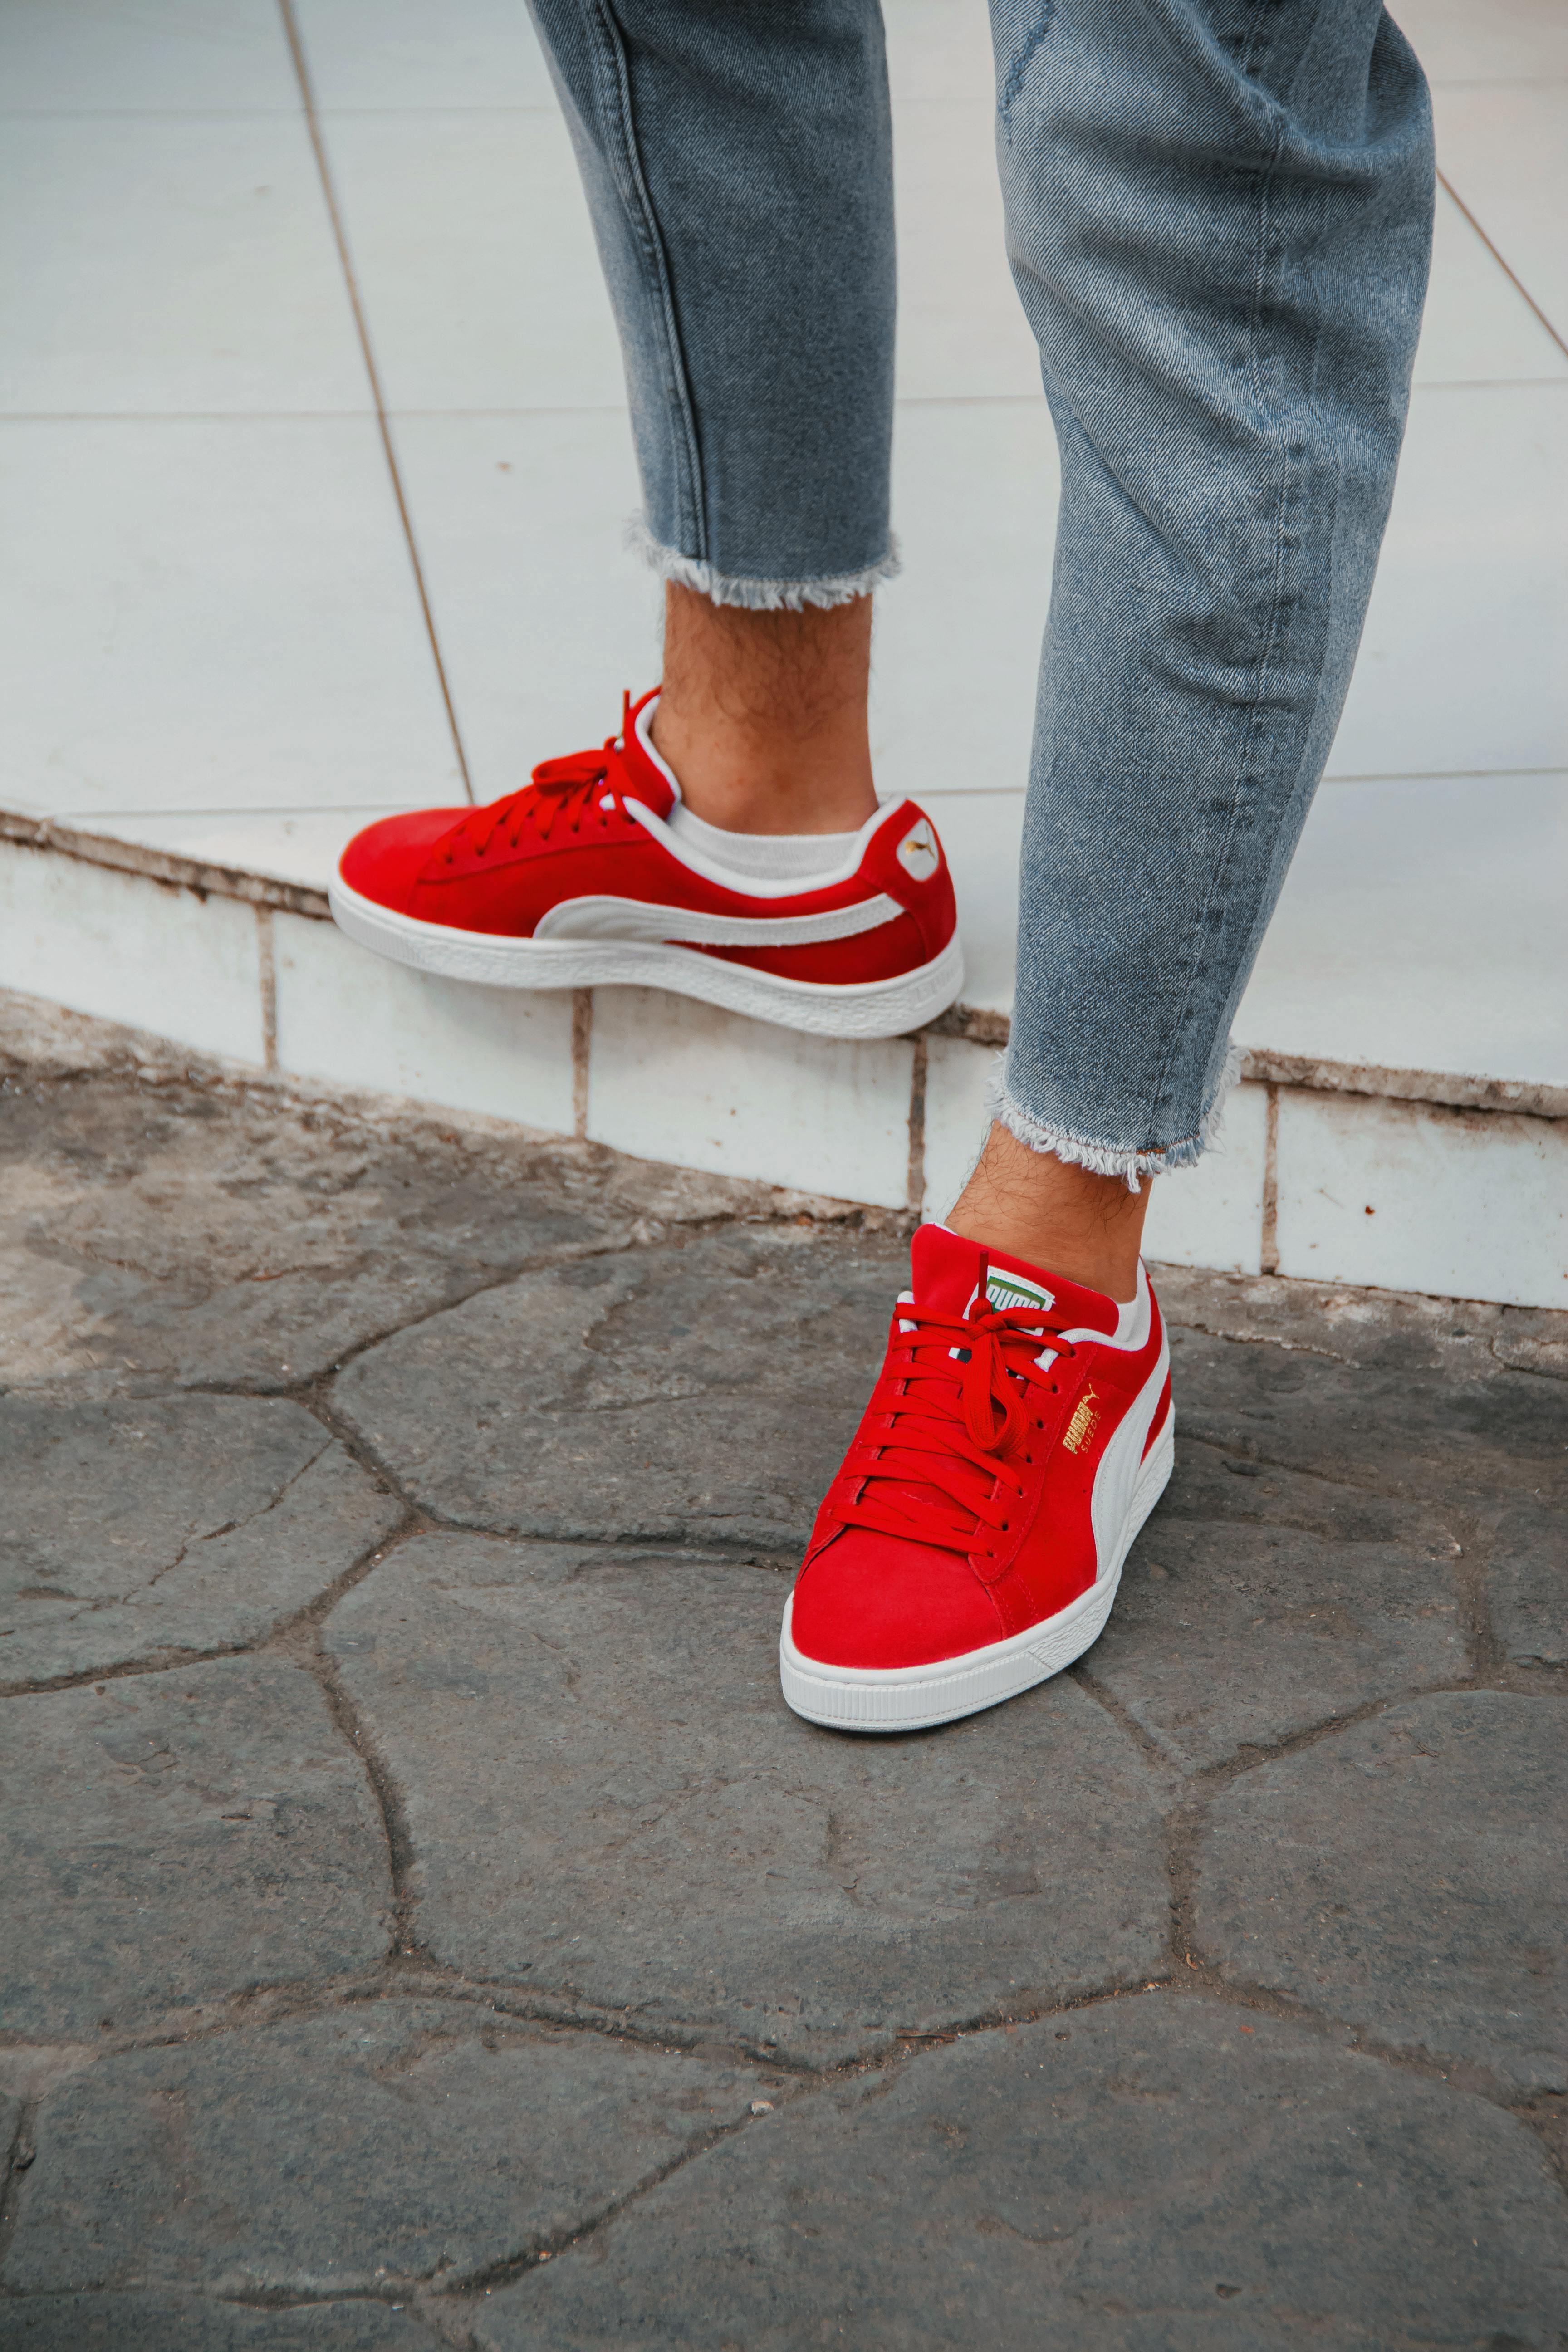 Person Red Sneakers · Free Stock Photo